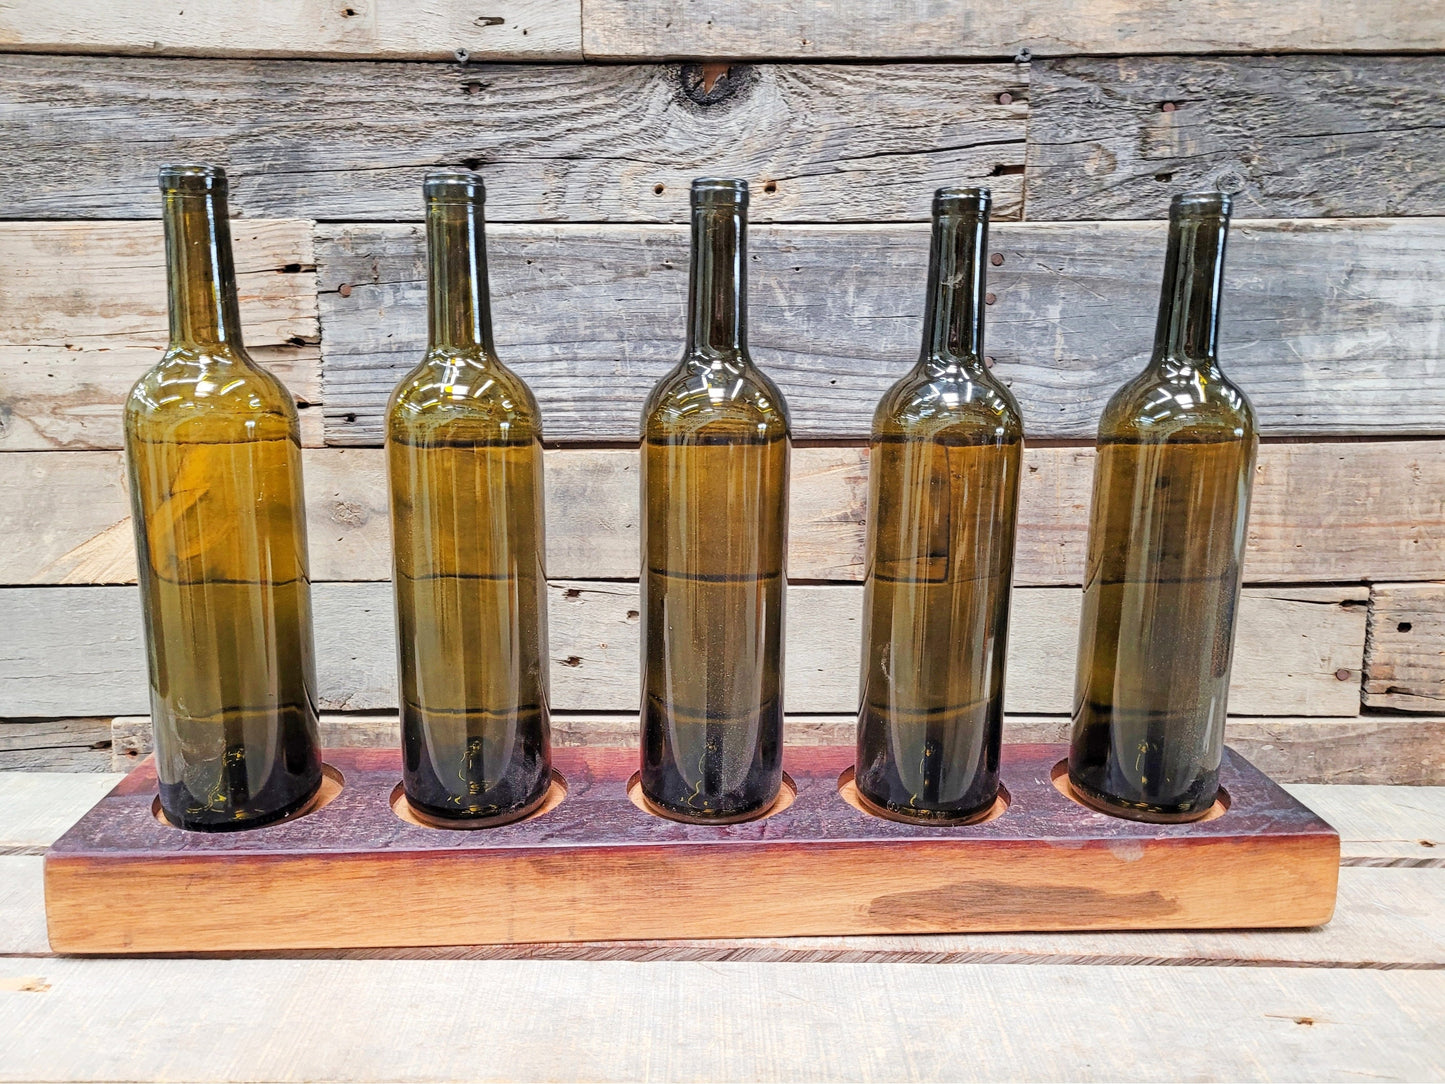 SALE Charles Krug Wine Barrel 5 Bottle Holder - Made from retired California - 100% Recycled and Ready to Ship! 092822-8